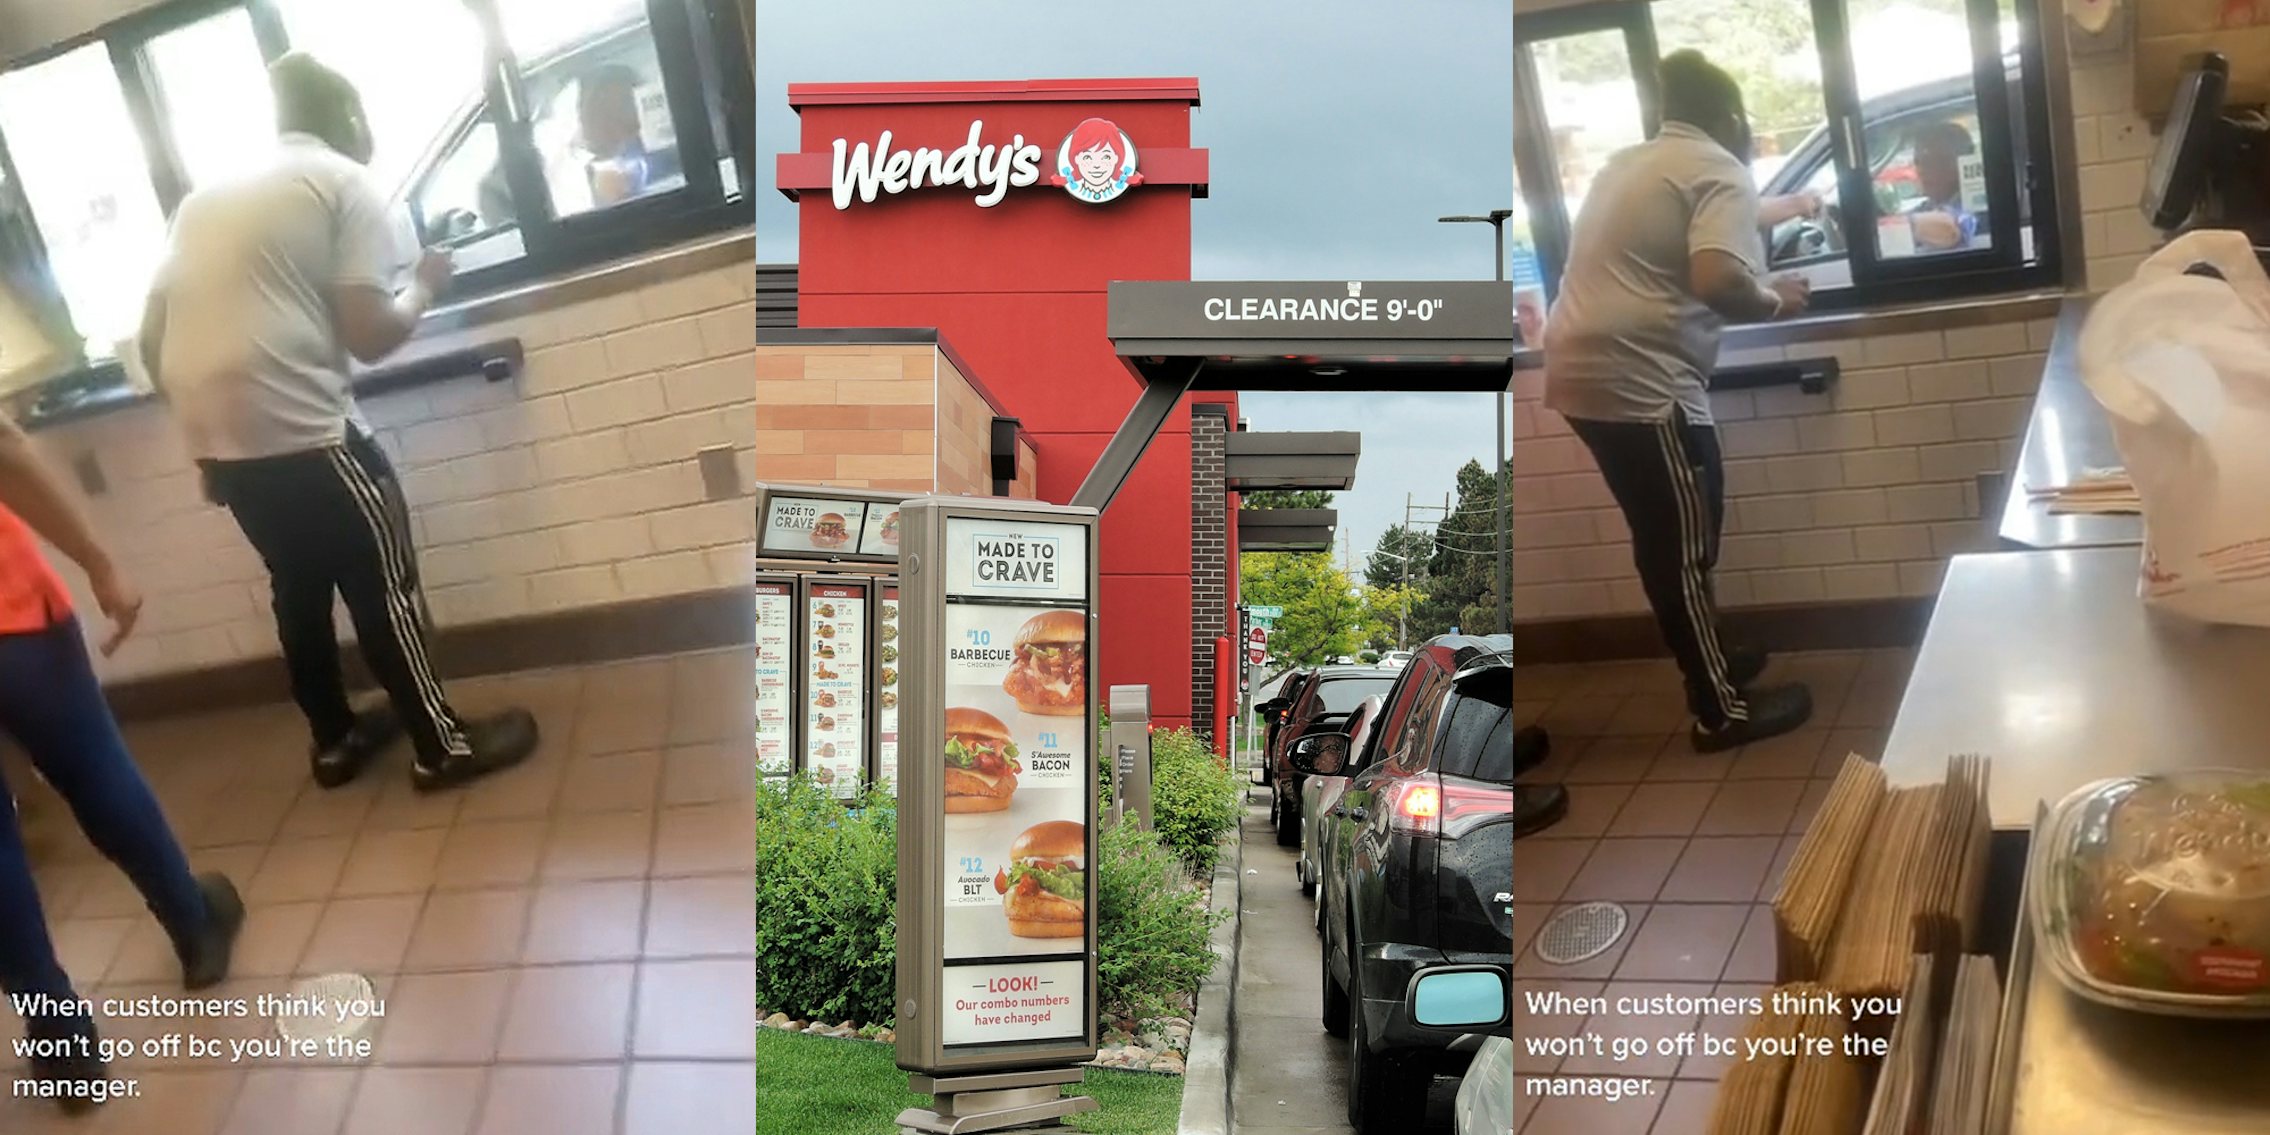 Wendy's manager speaking through drive thru window caption 'When customers think you won't go off bc you're the manager.' (l) Wendy's drive thru with sign (c) Wendy's manager speaking through drive thru window caption 'When customers think you won't go off bc you're the manager.' (r)